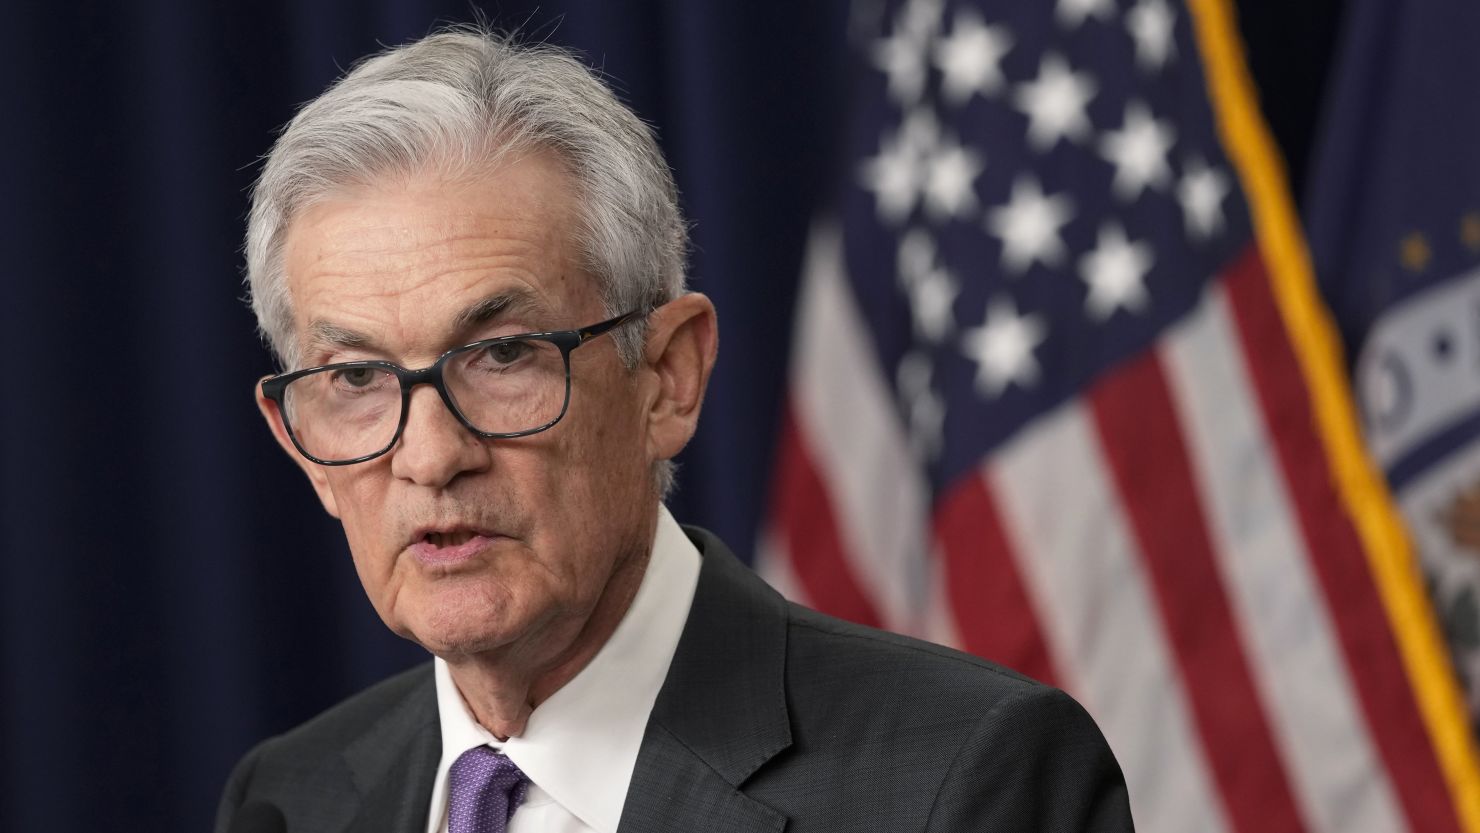 Federal Reserve Chair Jerome Powell speaks during a news conference in Washington, DC, on March 20.